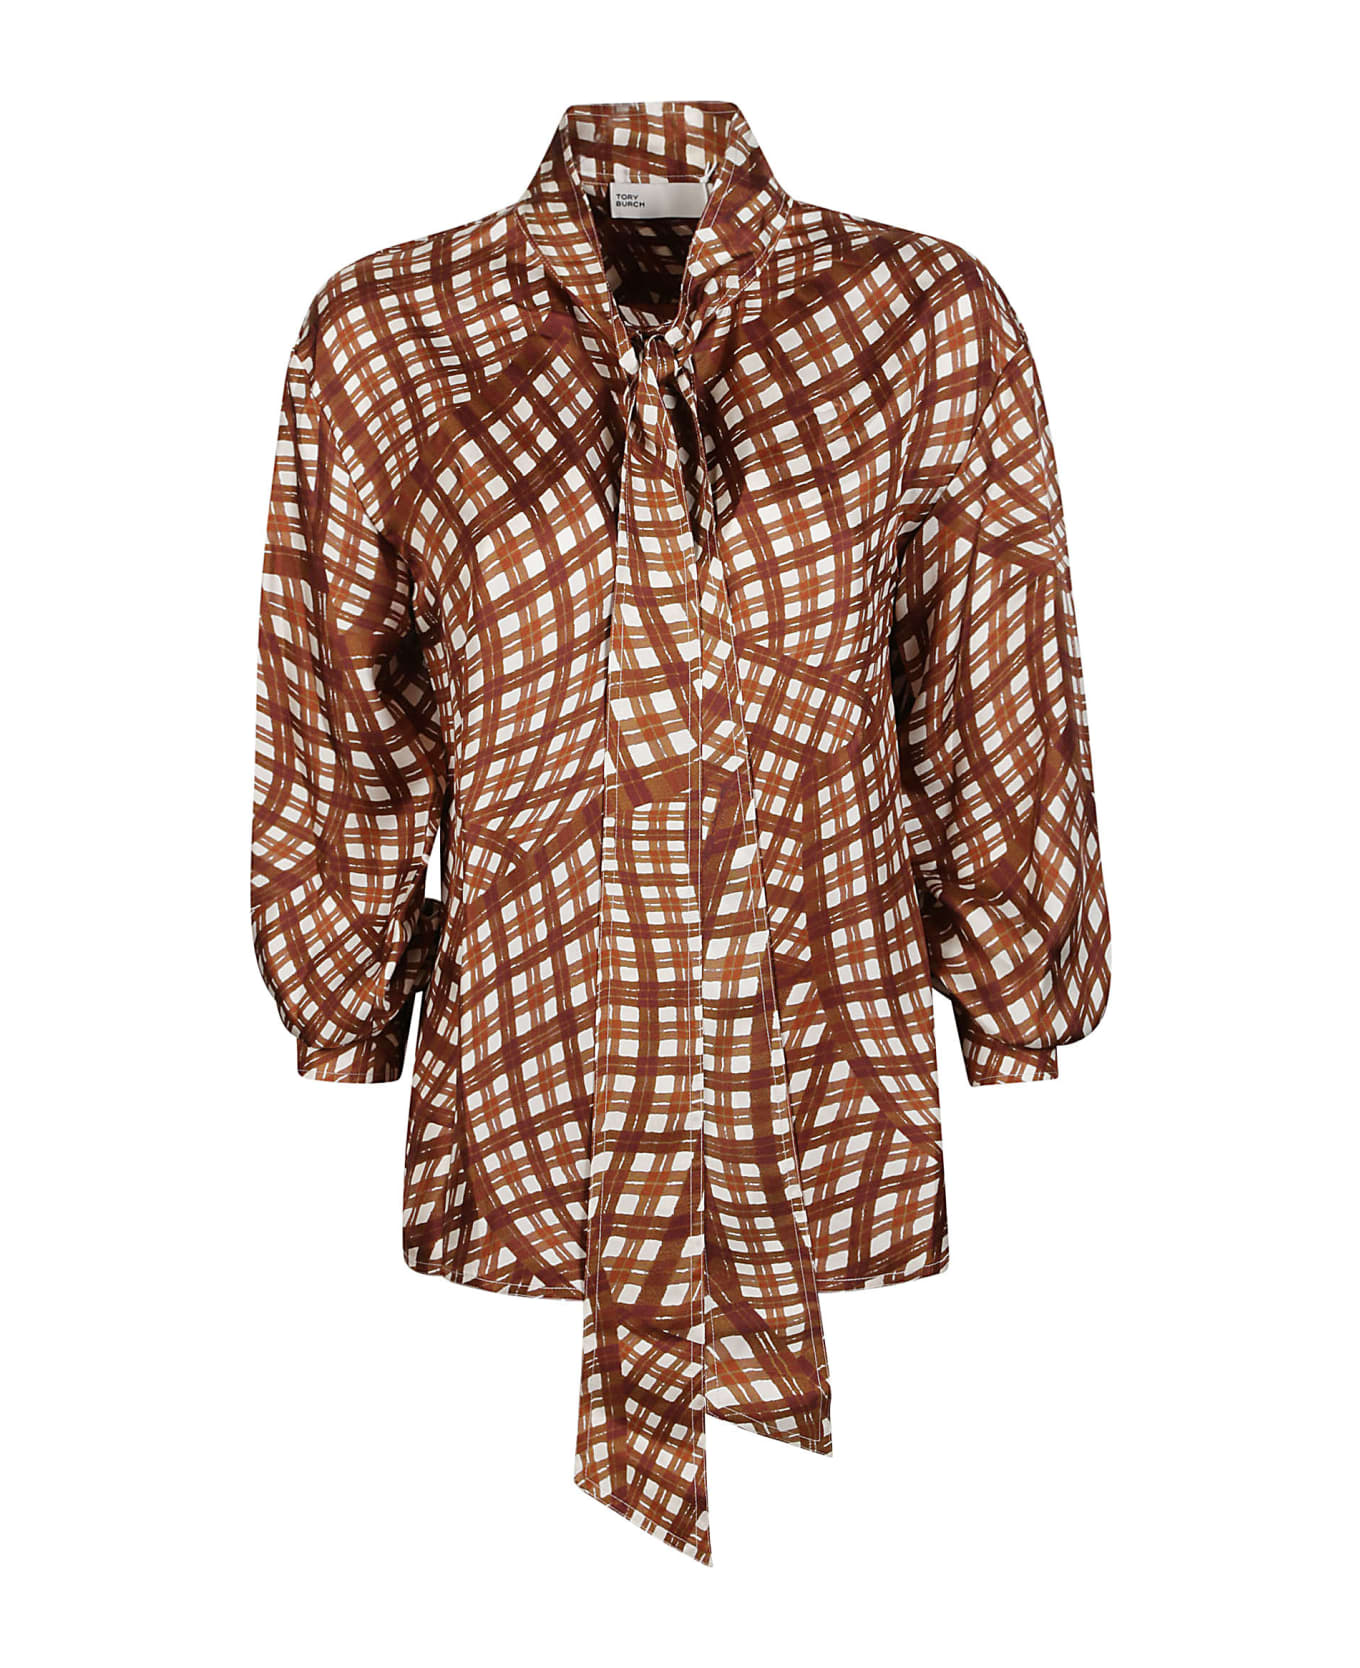 Tory Burch Bow Printed Blouse - Brown Warped Gingham